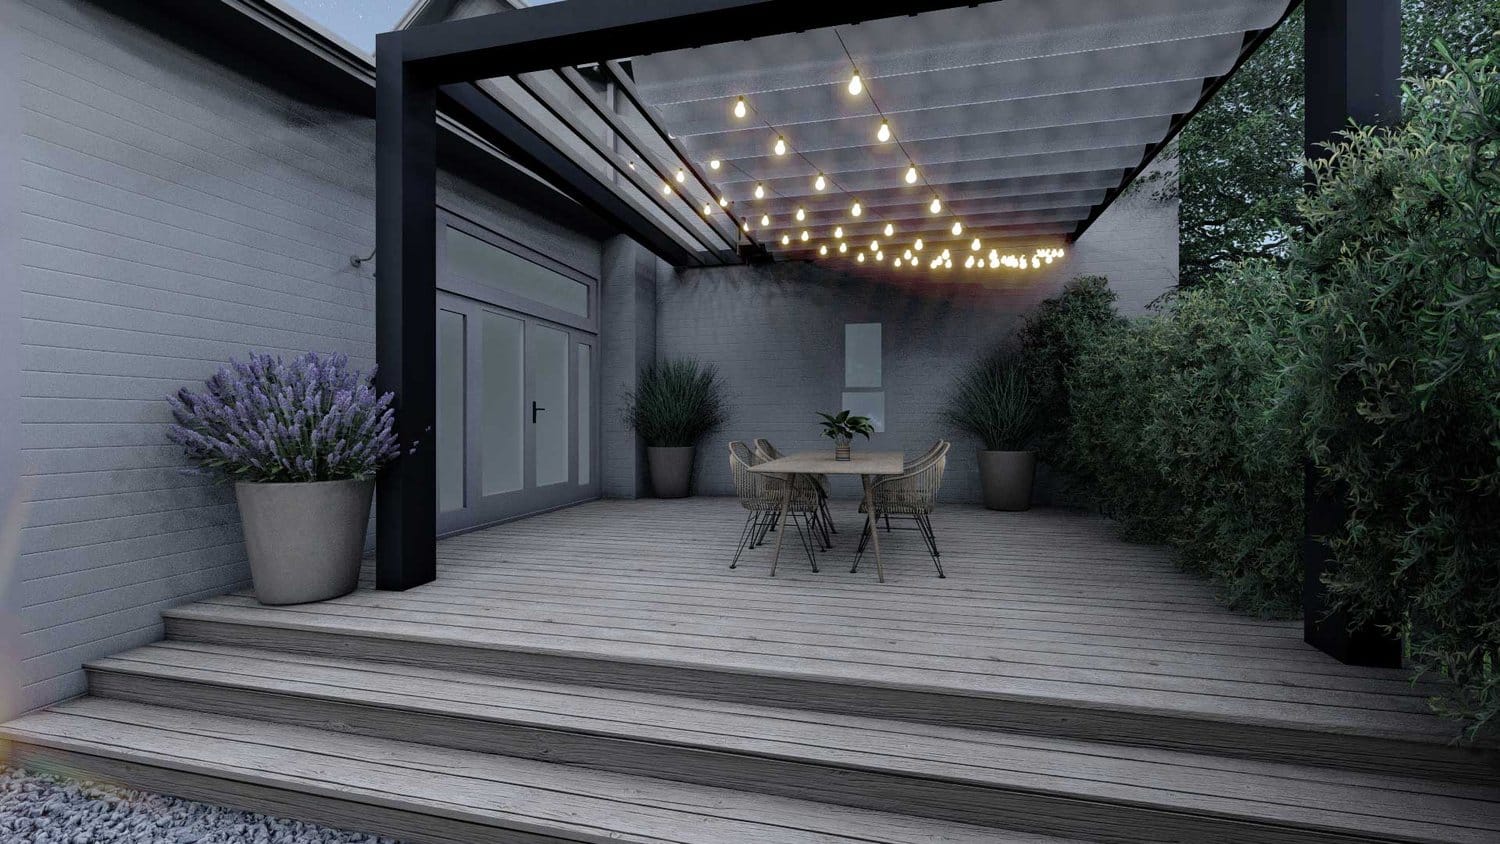 San Antonio deck and patio with pergola and string lights over seating area, and plants